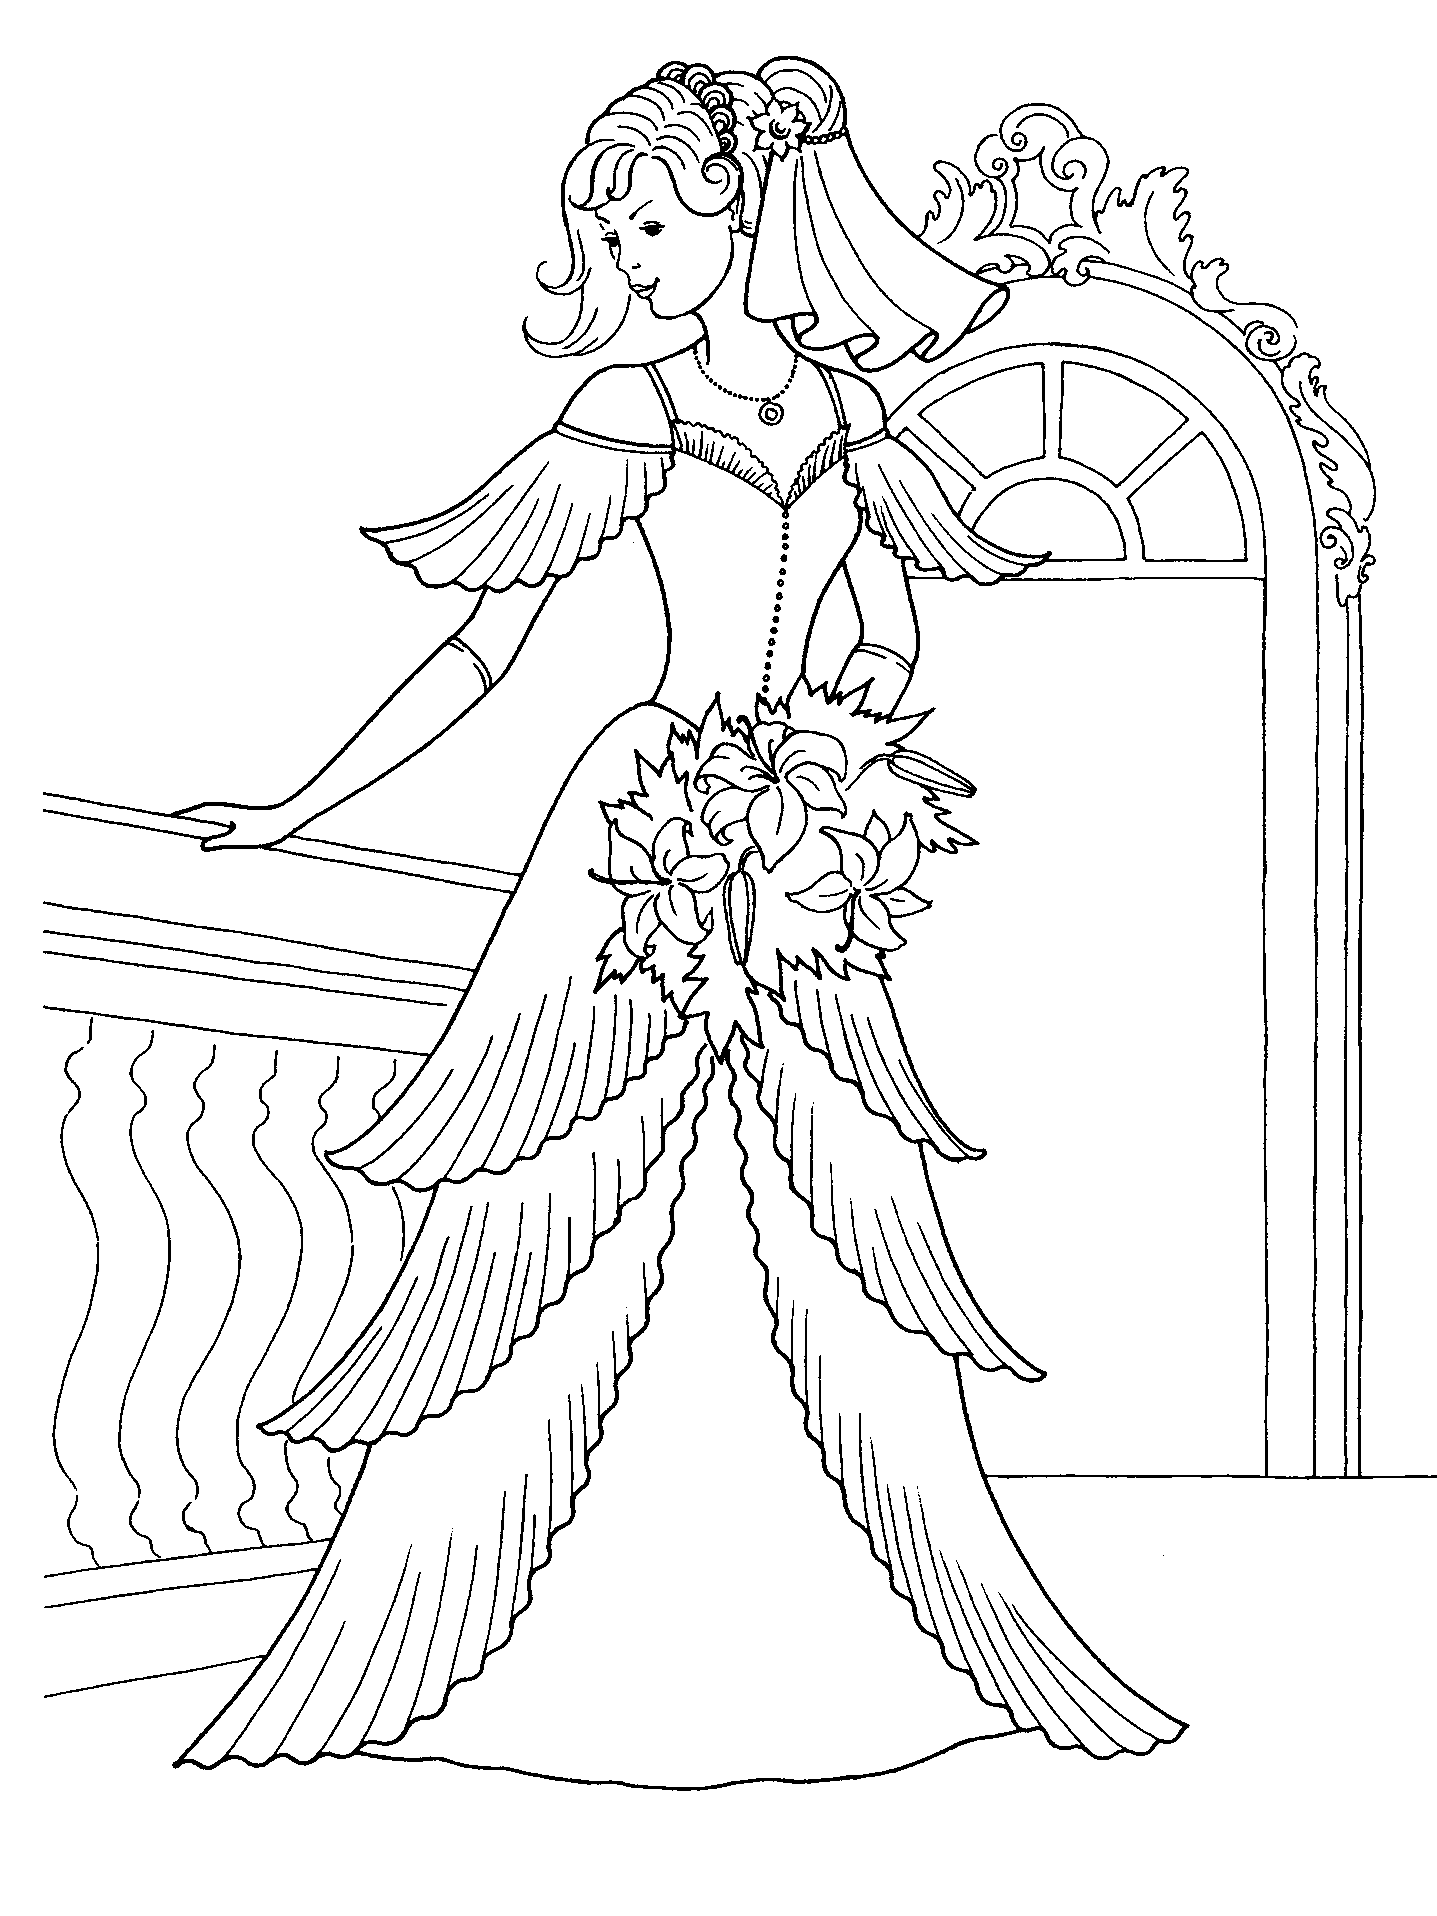 Wedding Coloring Pages (3) Coloring Kids - Coloring Kids